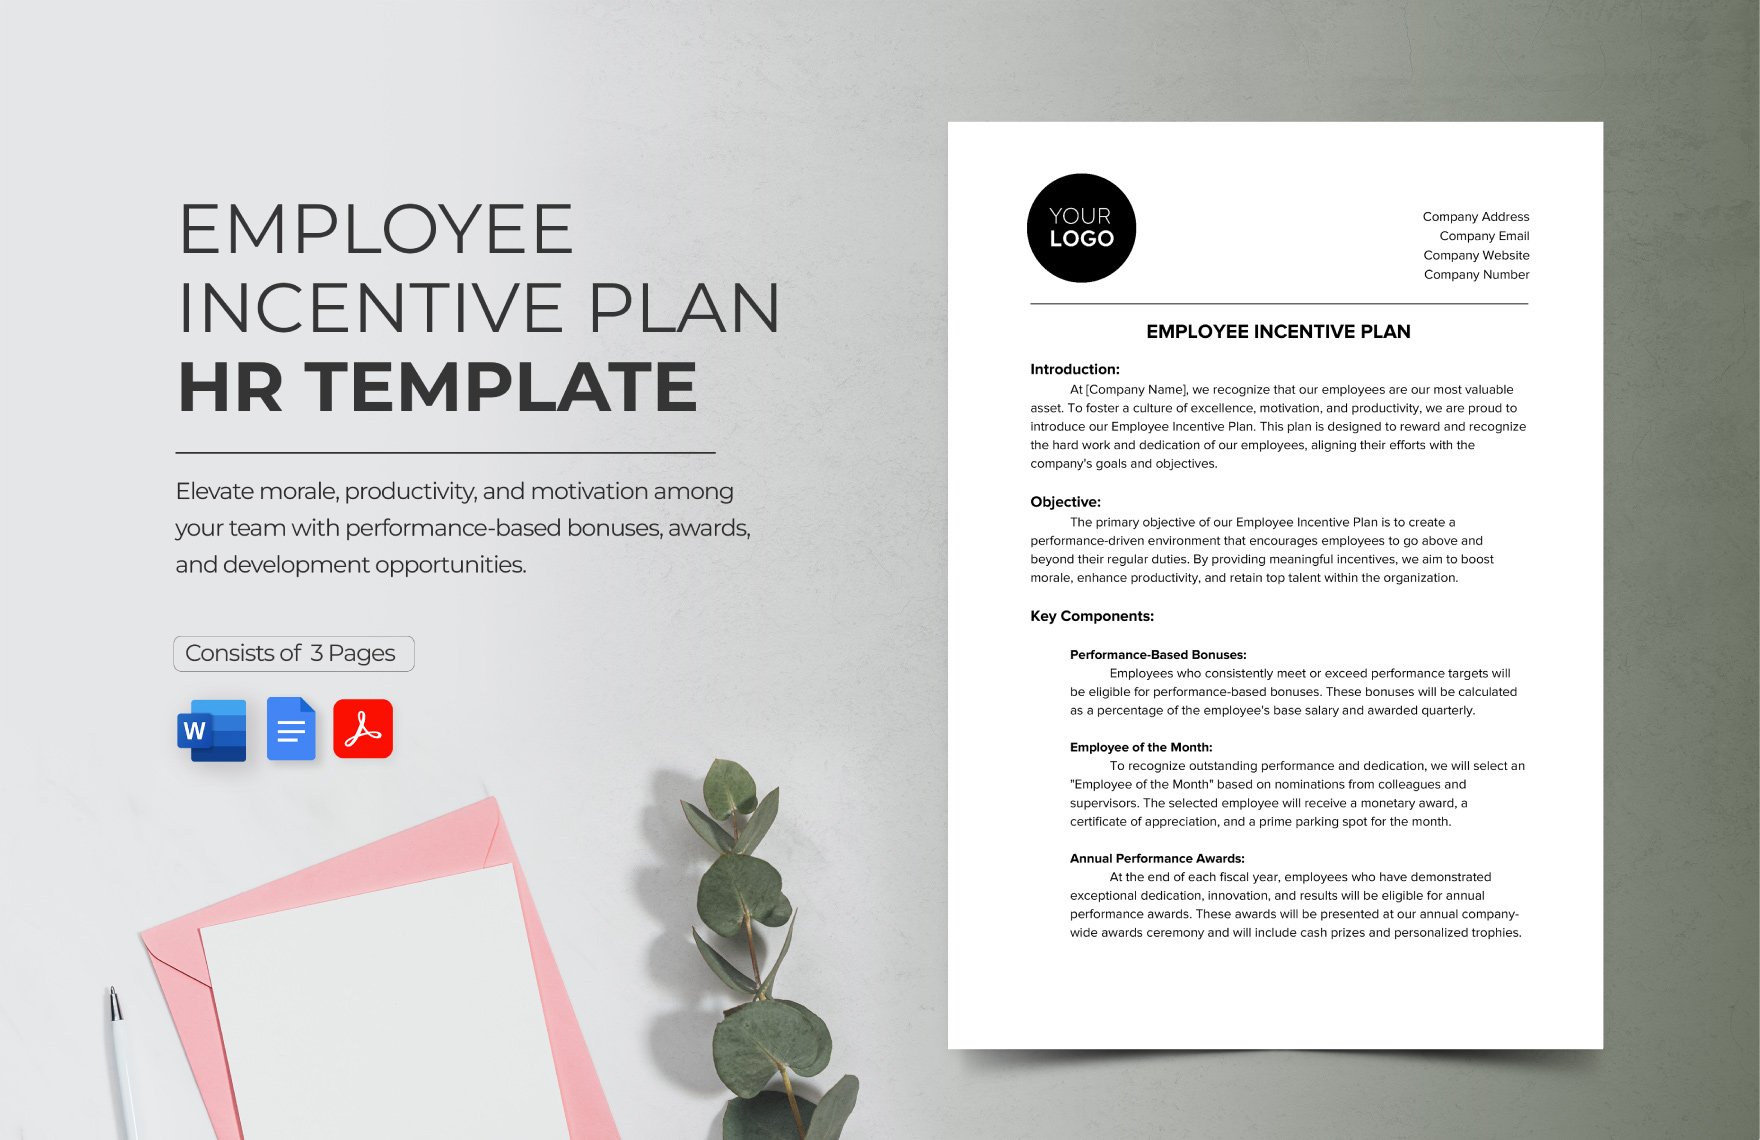 Employee Incentive Plan HR Template